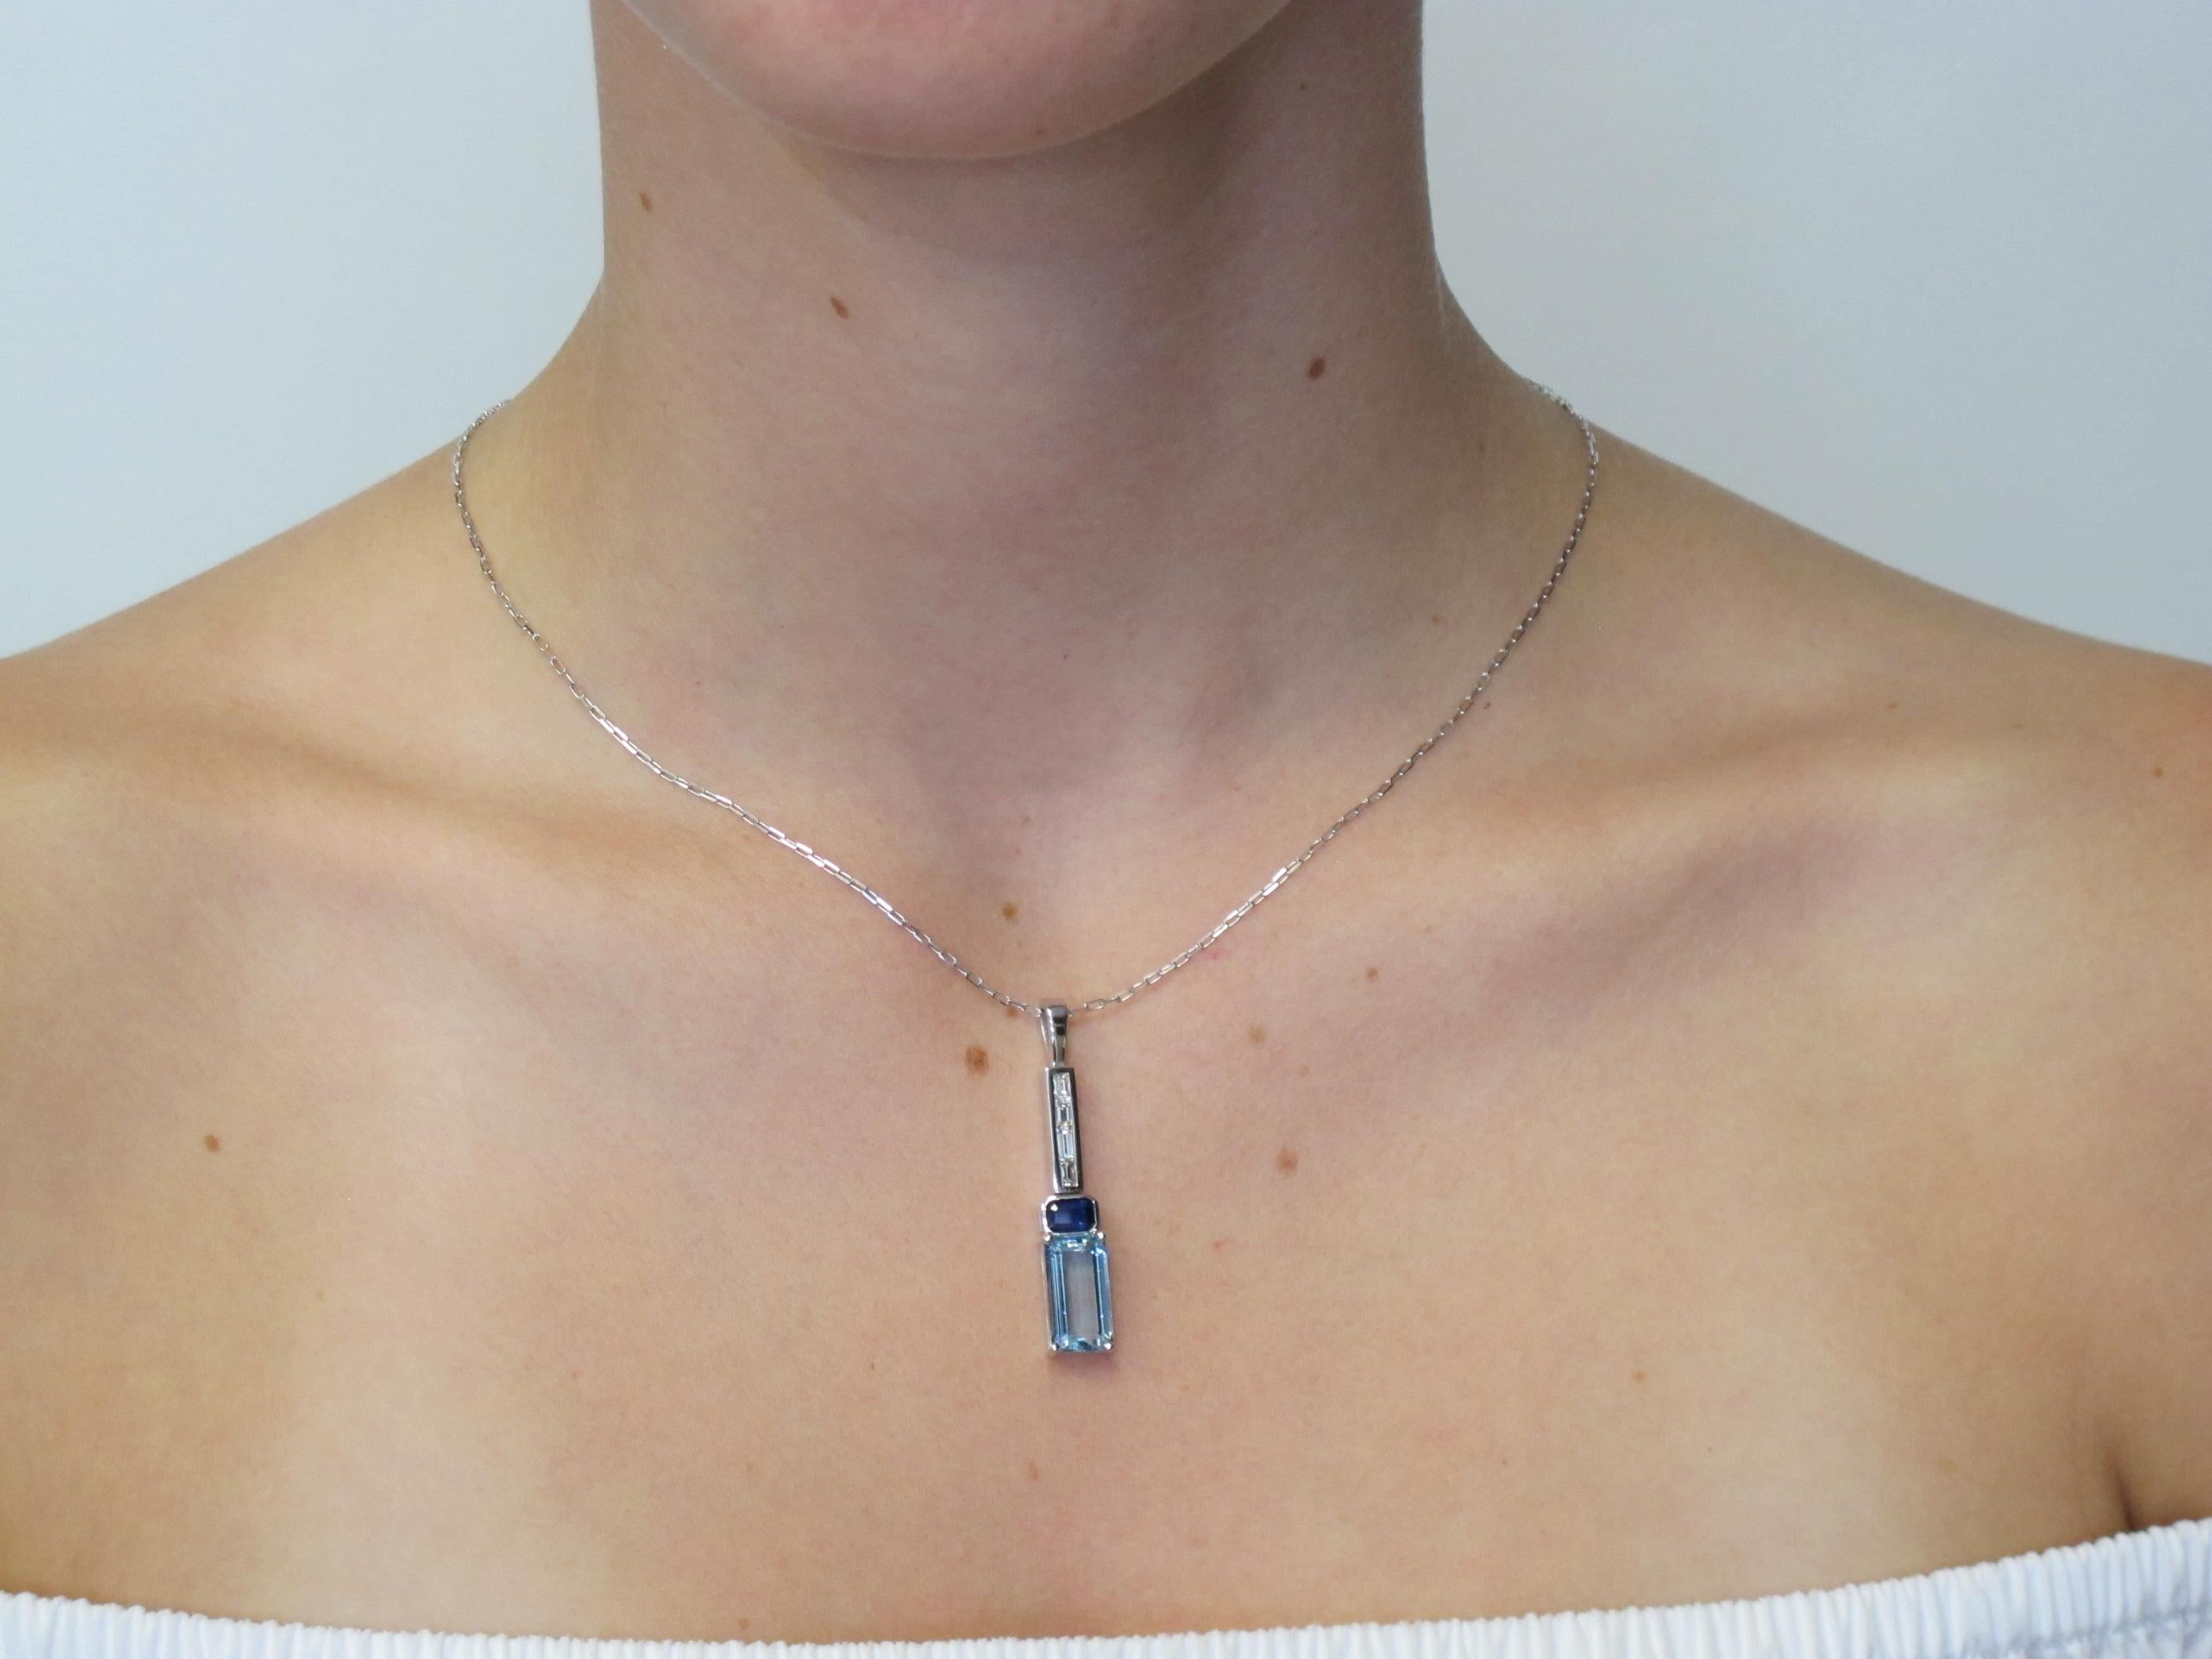 This clean, classic pendant has a soft delicate grace to it. Its simple lines and multiple gemstones, give this necklace some subtle spunk! The depth of the color in this stunning aquamarine gemstone is incredibly rare. Our take on Art Deco; 